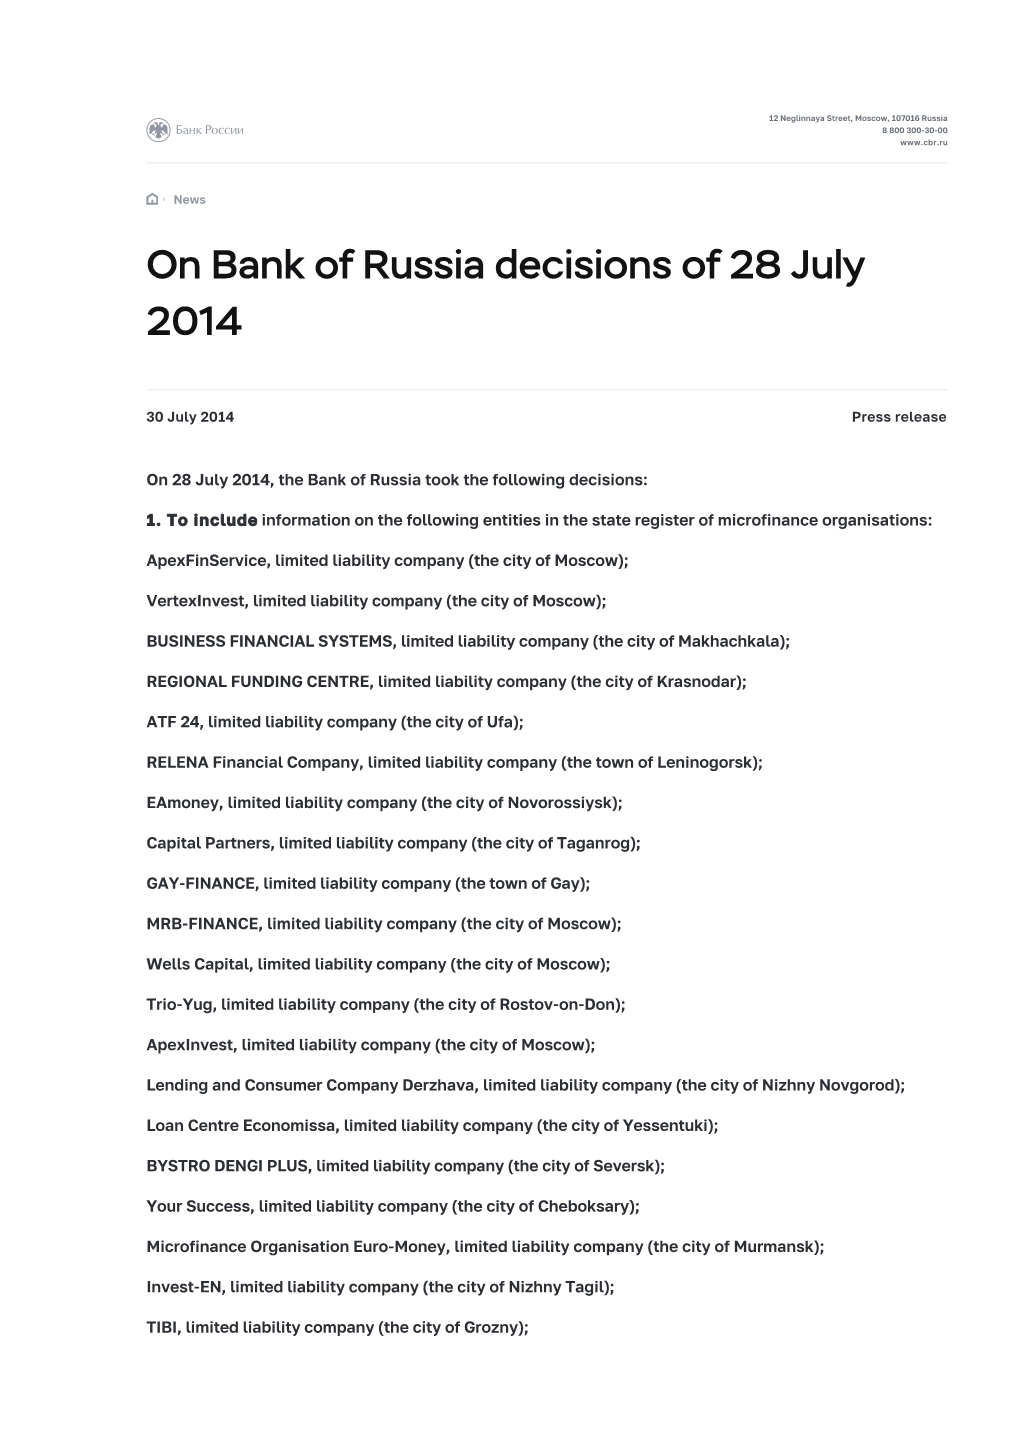 On Bank of Russia Decisions of 28 July 2014 | Bank of Russia